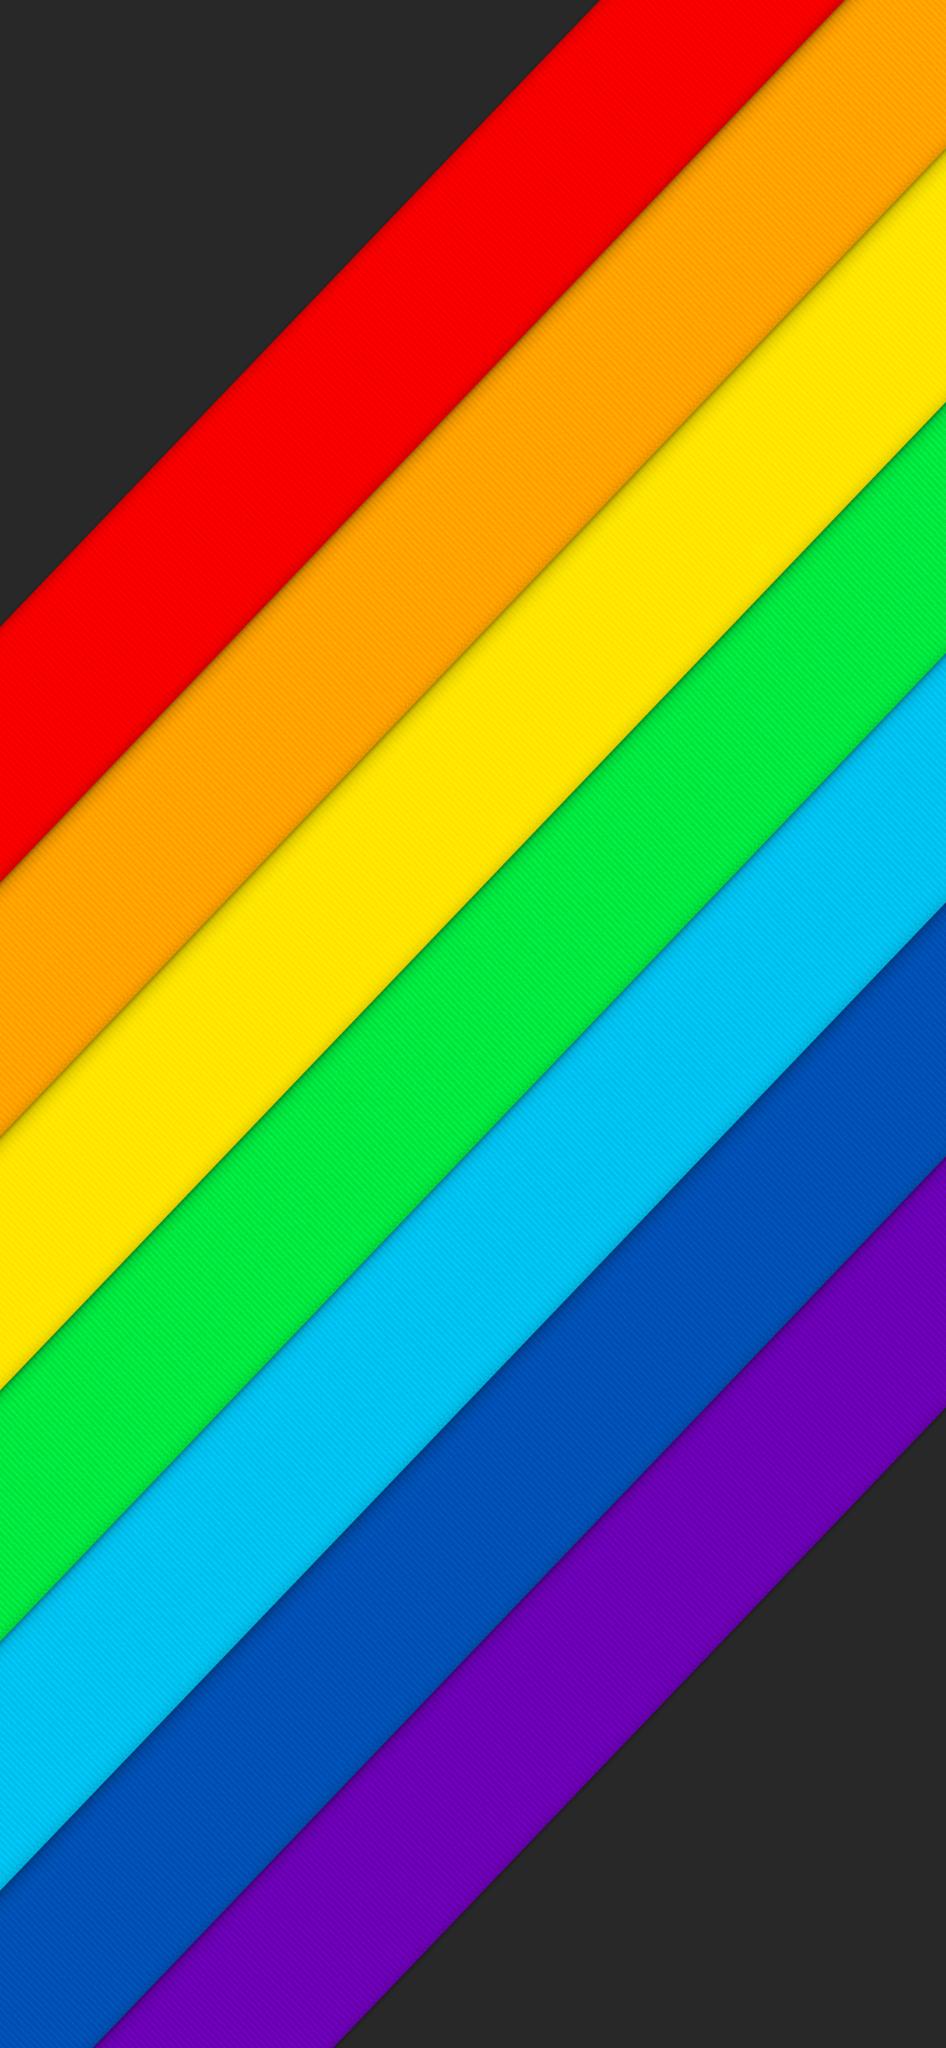 Pride Month wallpapers for your iPhone.